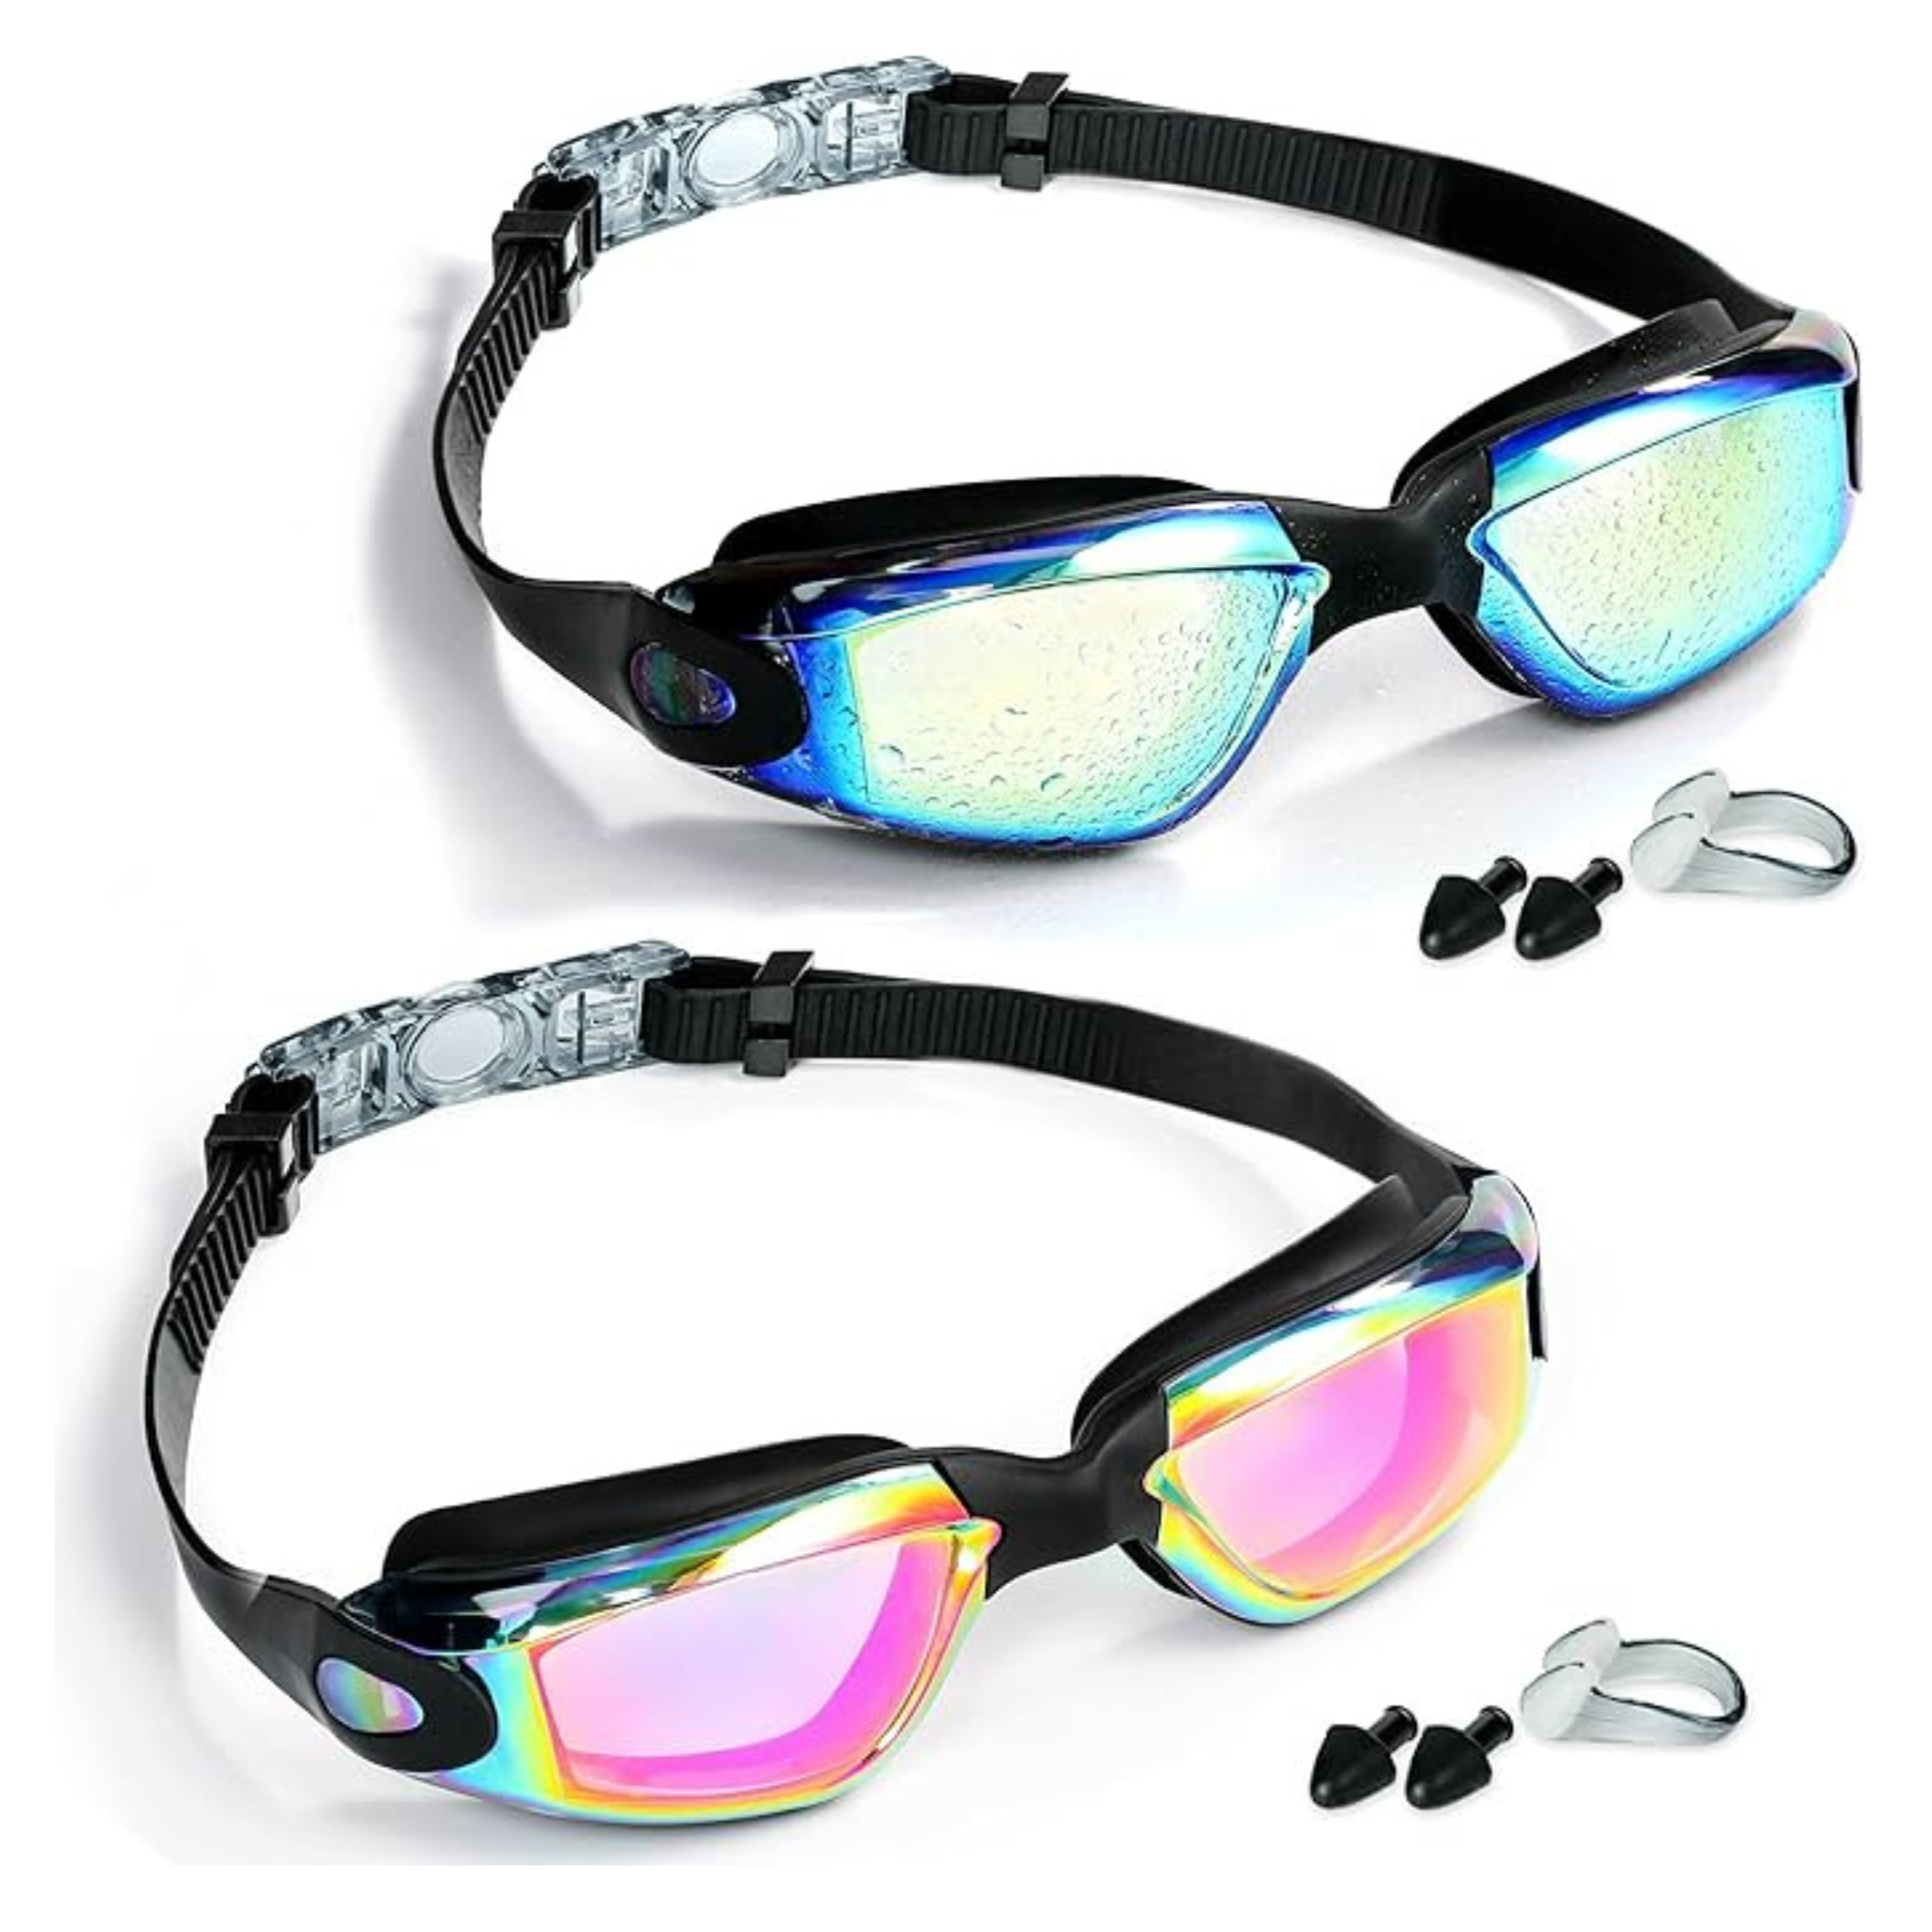 2-Pack Adult's Swimming Goggles